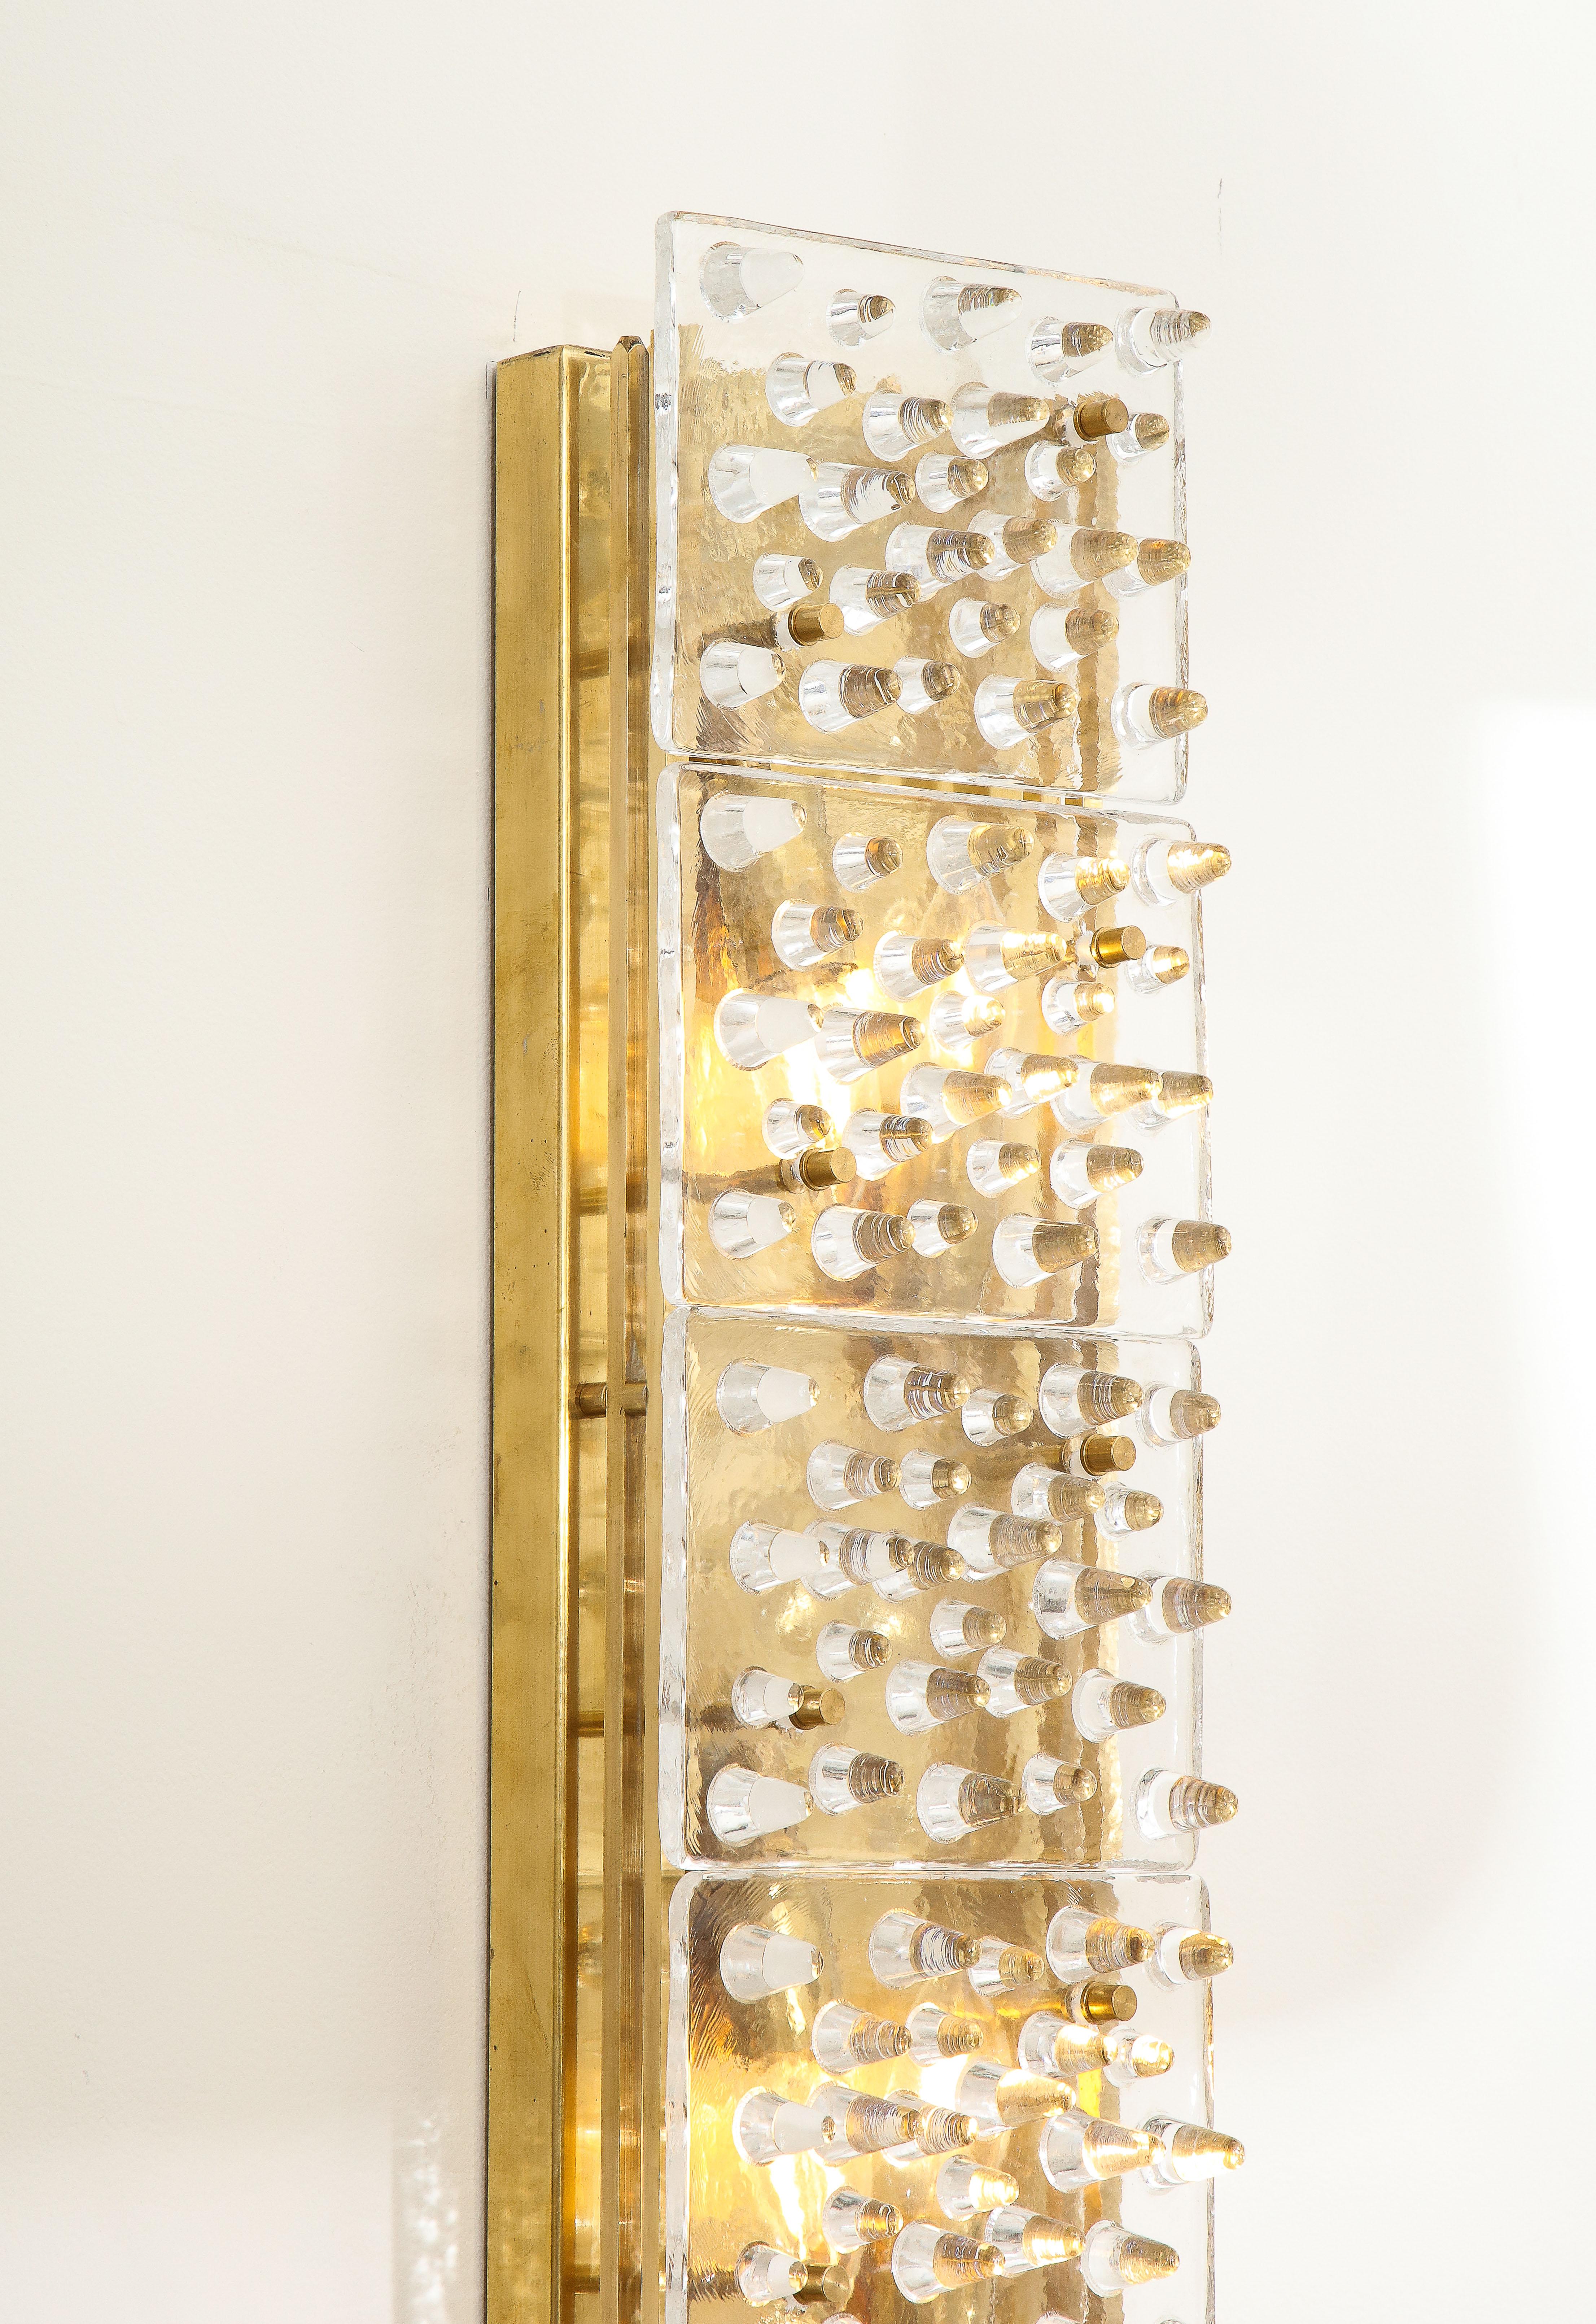 Bespoke extra-large pair of brass and clear Murano glass blocks sconces, Italy 2022. Individually, hand-casted rectangular Murano glass solid blocks which are textured with glass 